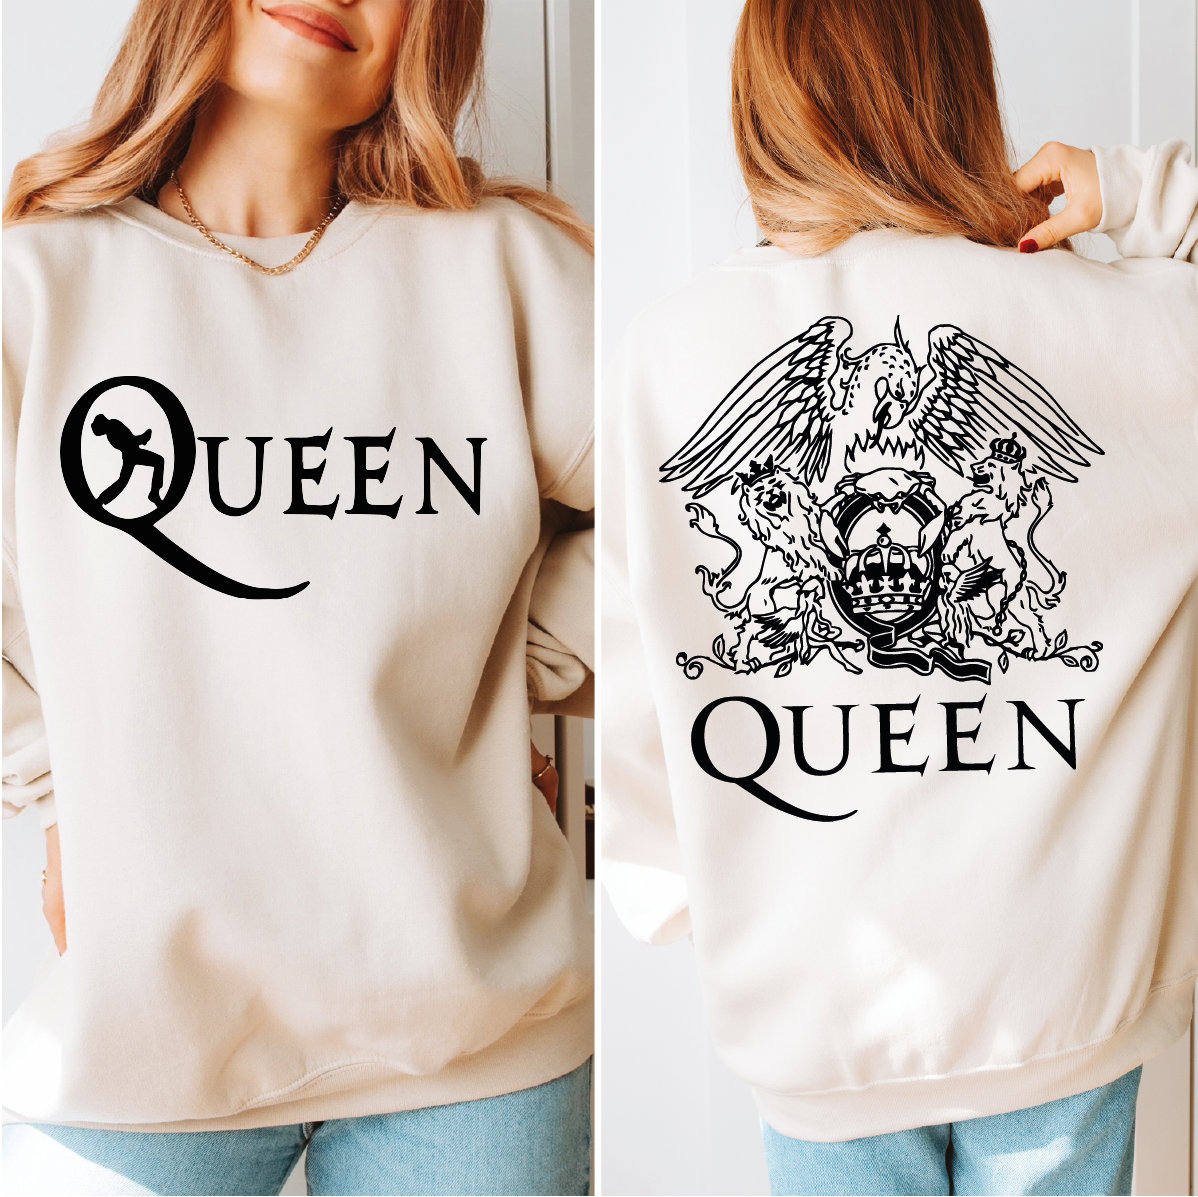 Queen - Etsy Shirt Vintage Band